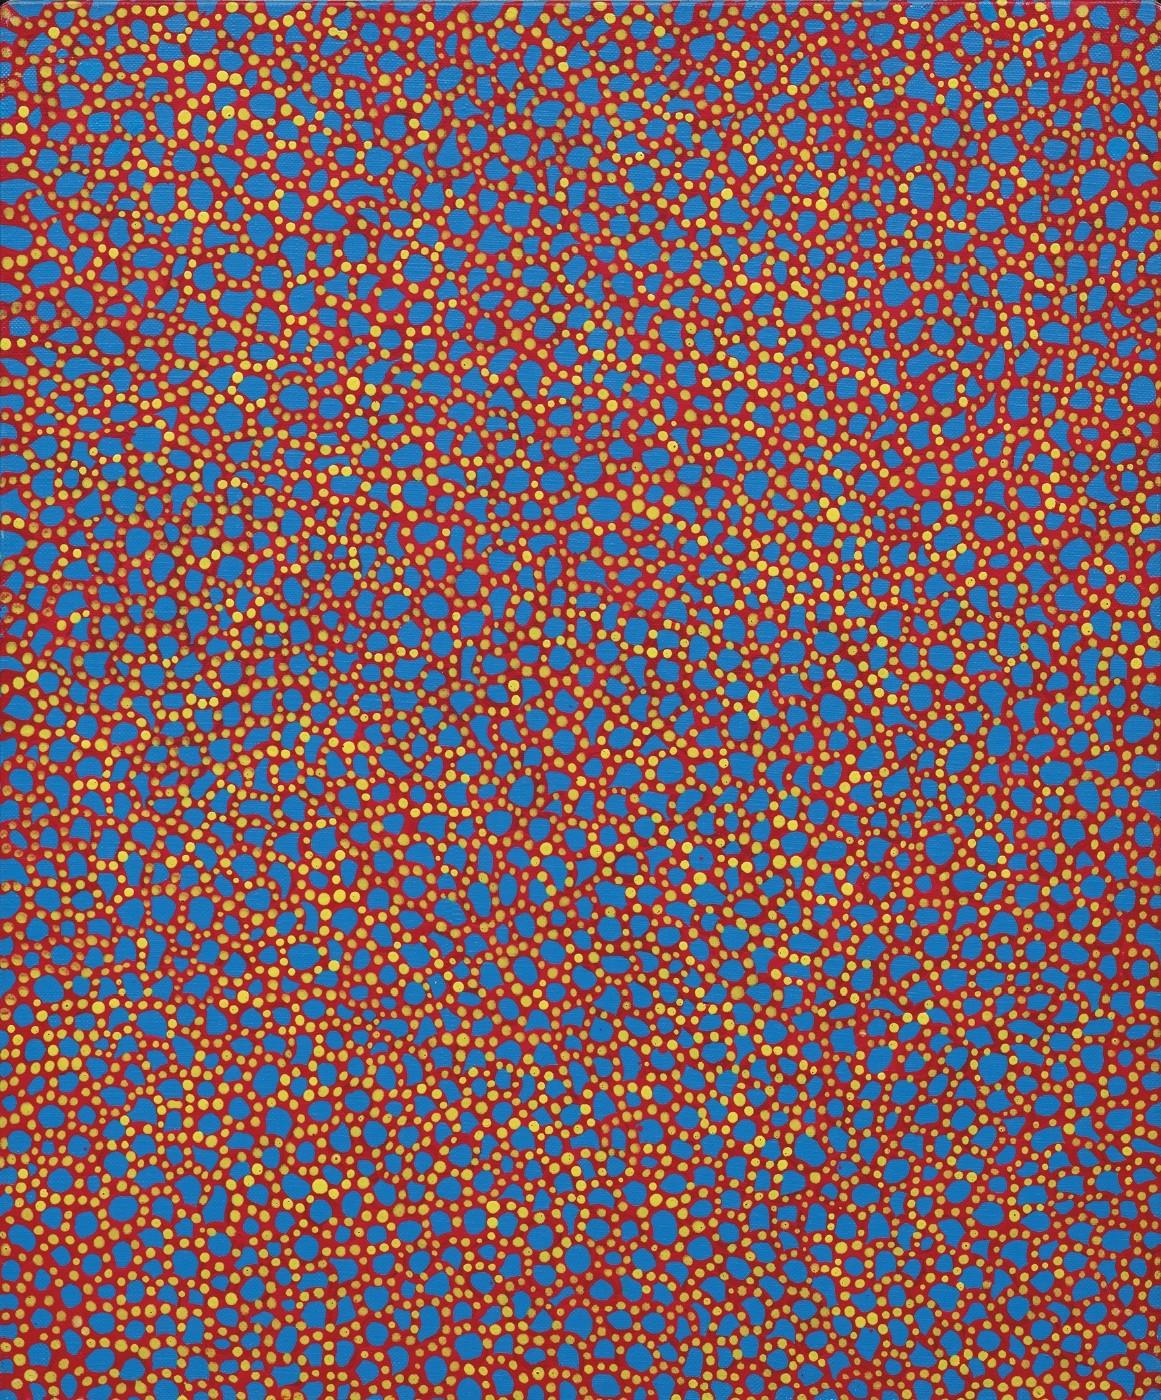 Yayoi Kusama, The Thames in the Morning, 1988